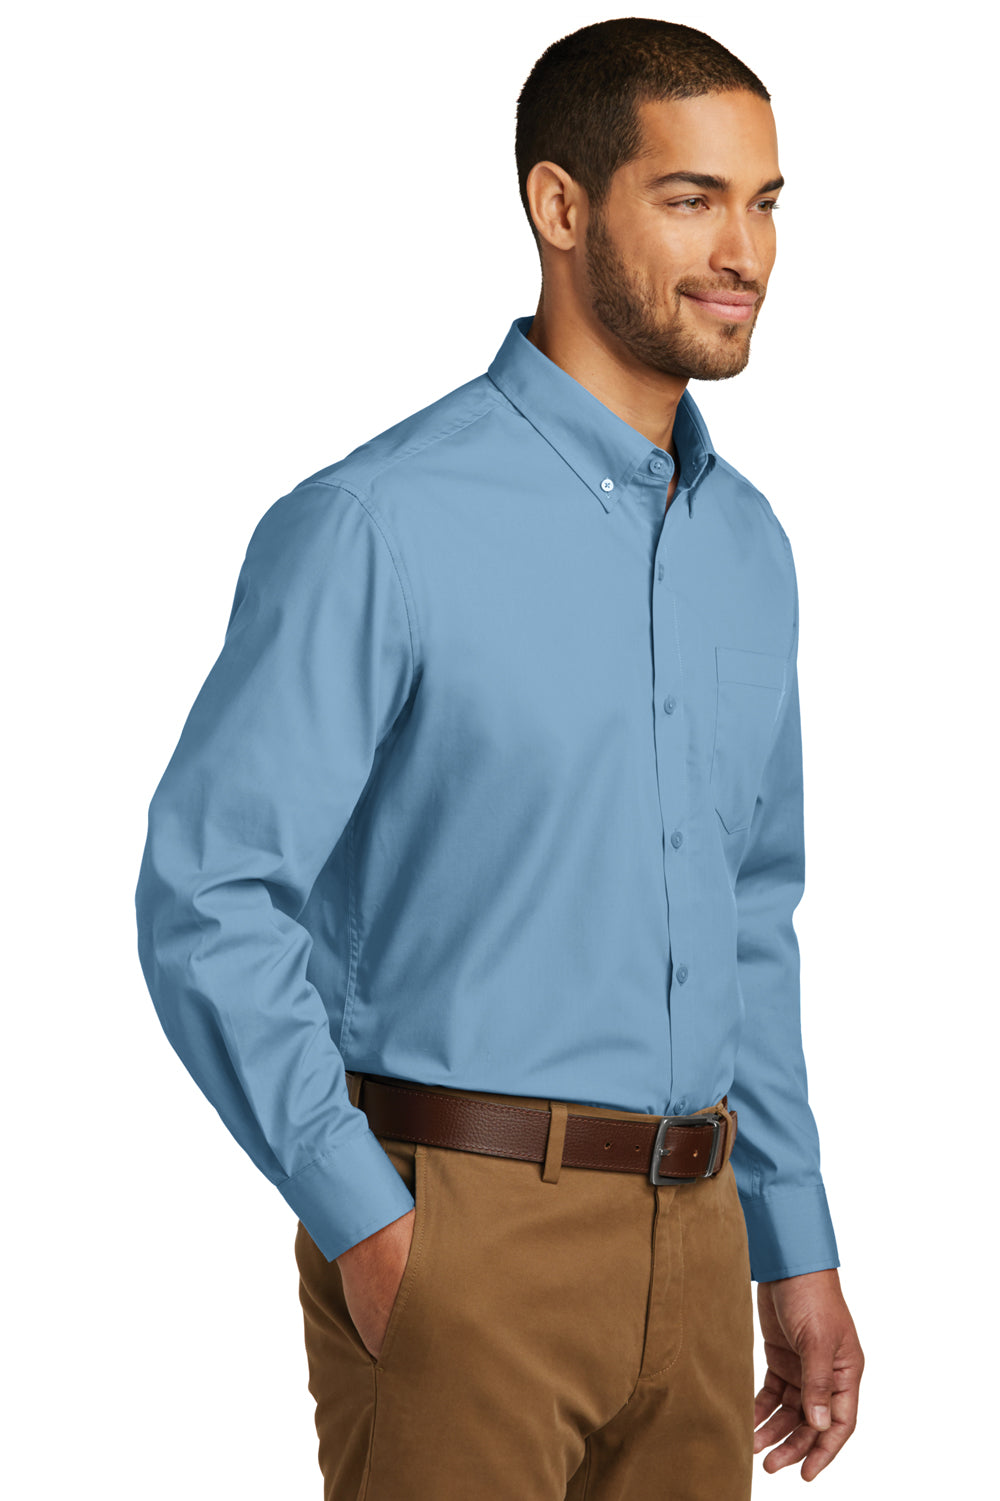 Port Authority W100/TW100 Carefree Stain Resistant Long Sleeve Button Down Shirt w/ Pocket Carolina Blue 3Q